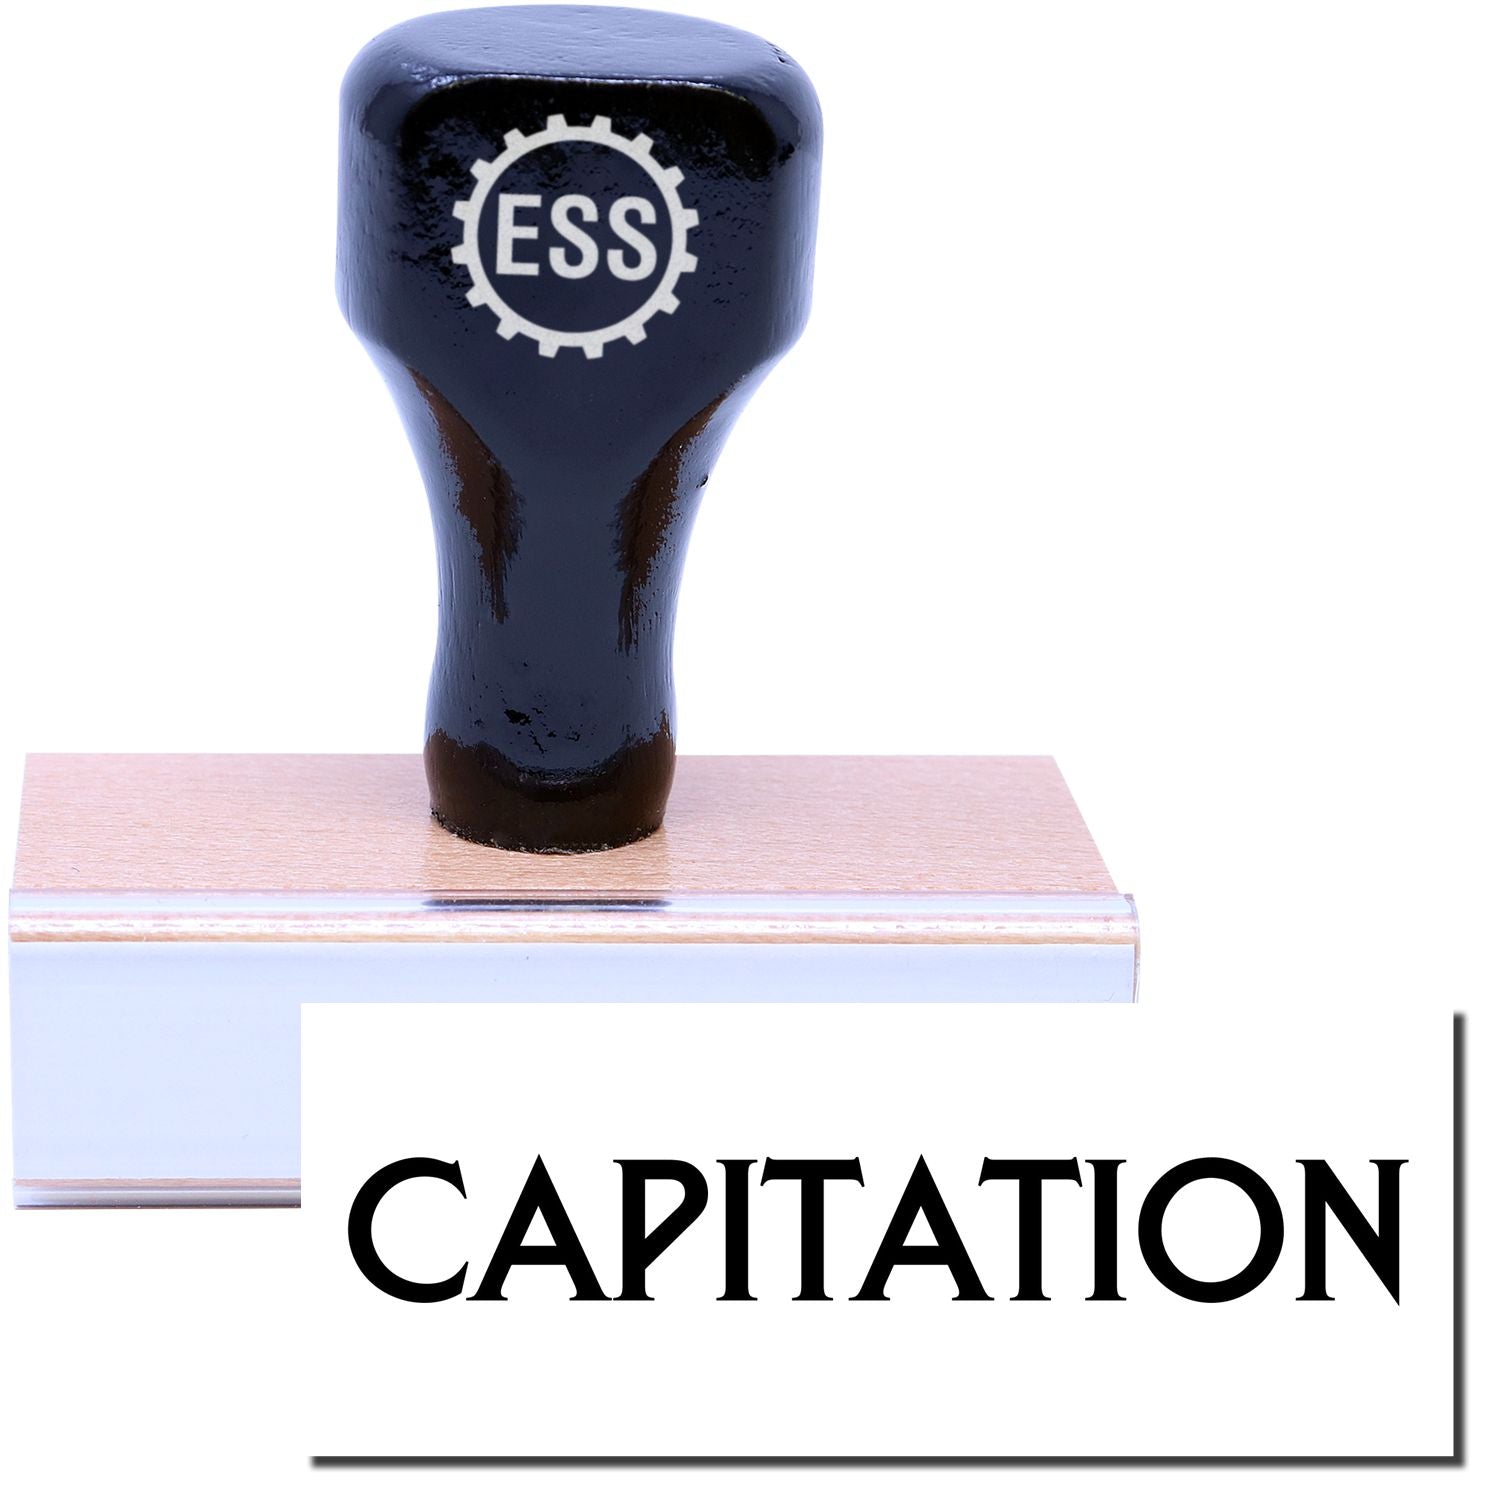 A stock office medical rubber stamp with a stamped image showing how the text "CAPITATION" is displayed after stamping.